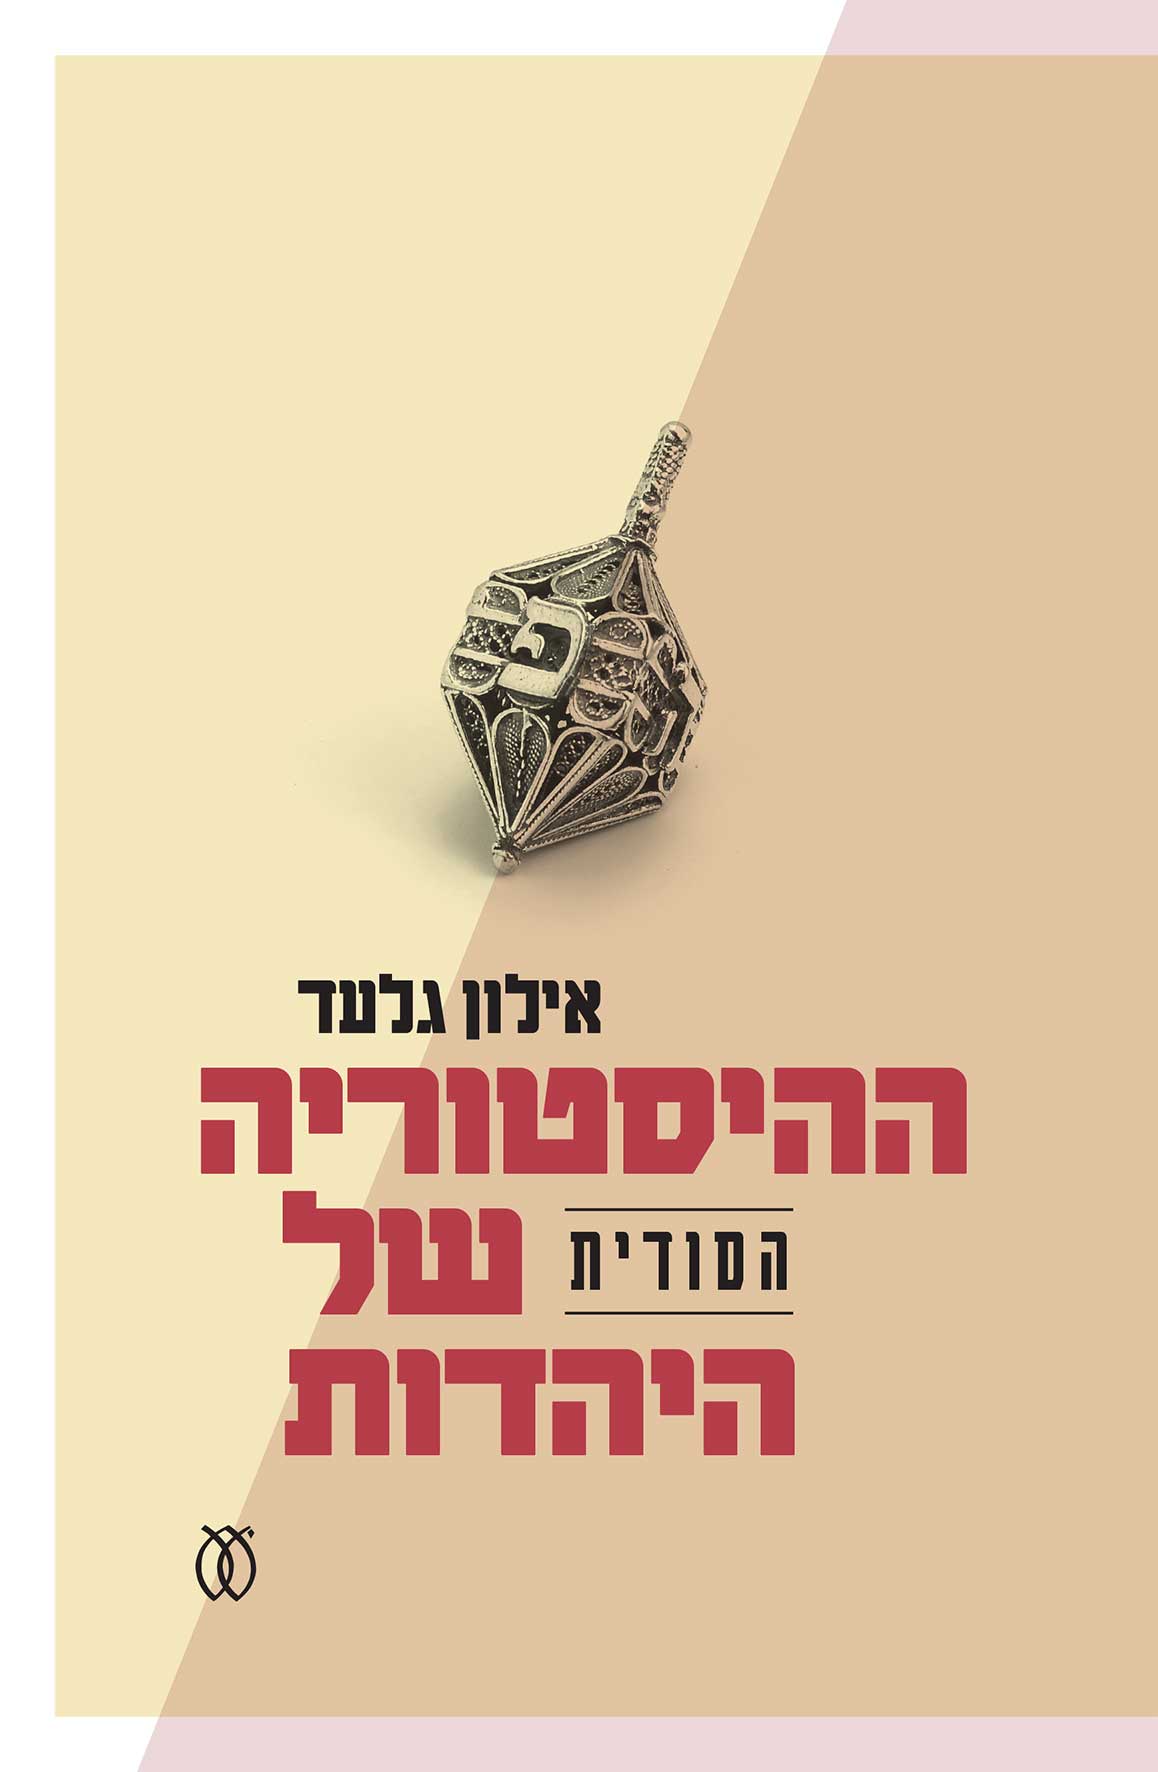 The cover of the book "The Secret History of Judaism" by Ilon Gilad, published by Am Oved 2023